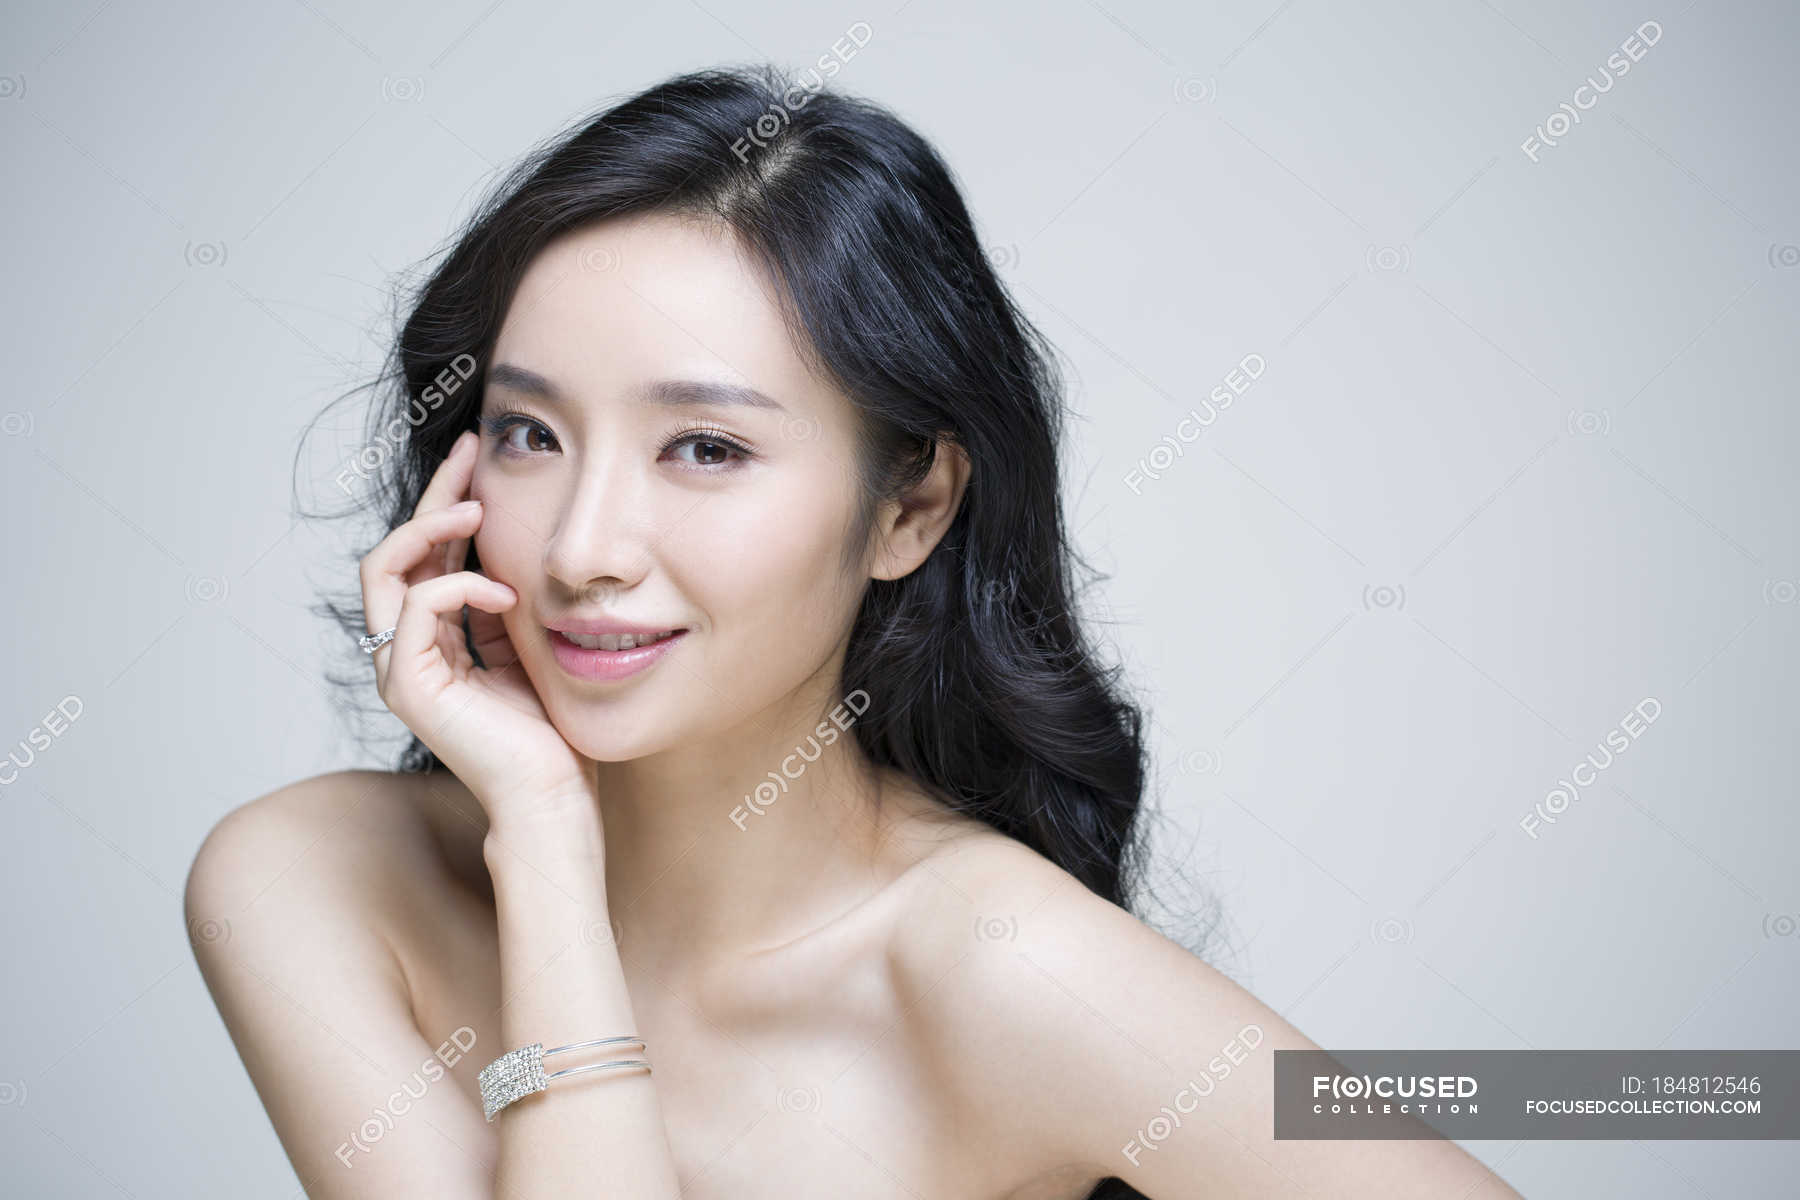 Chinese woman posing with hand on chin — Stock Photo | #184812546